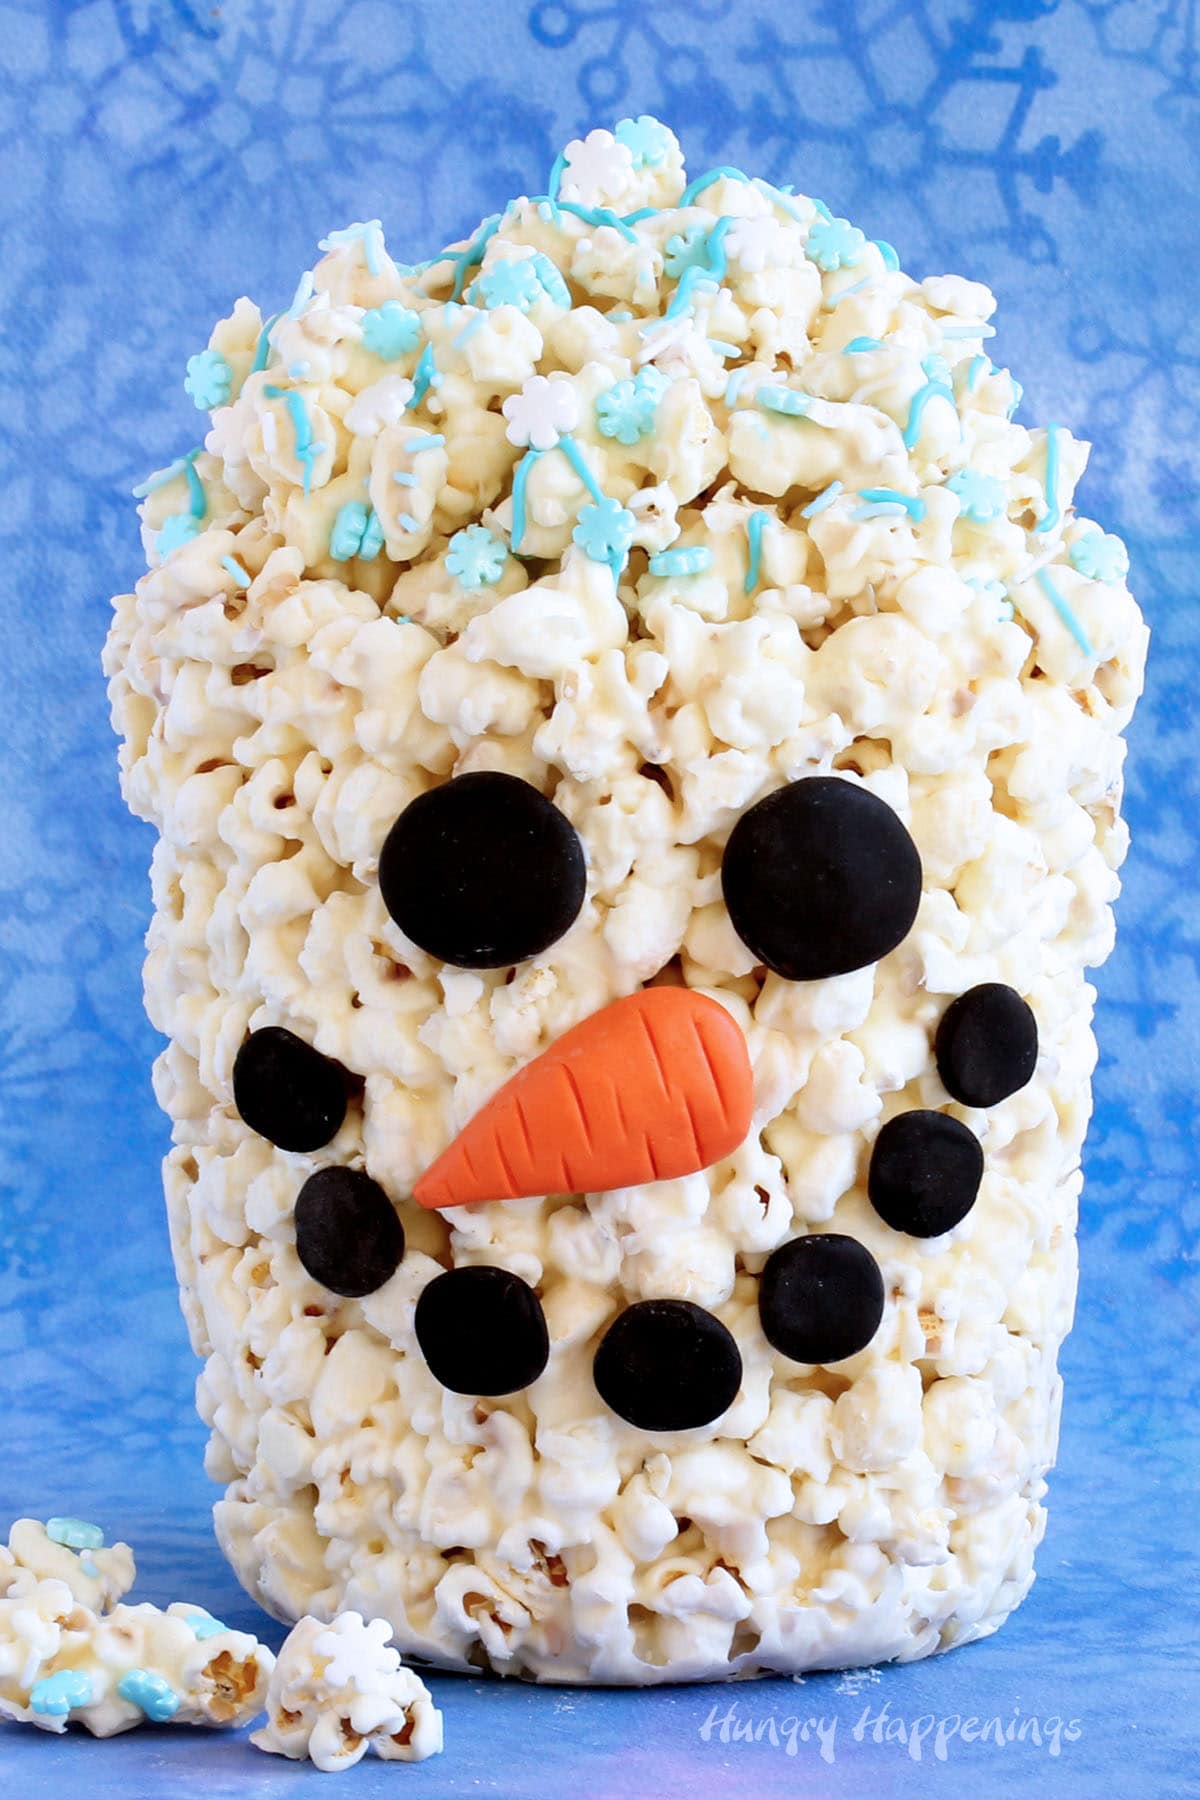 White chocolate popcorn bucket decorated like a snowman is filled with more popcorn sprinkled with snowflake candies.